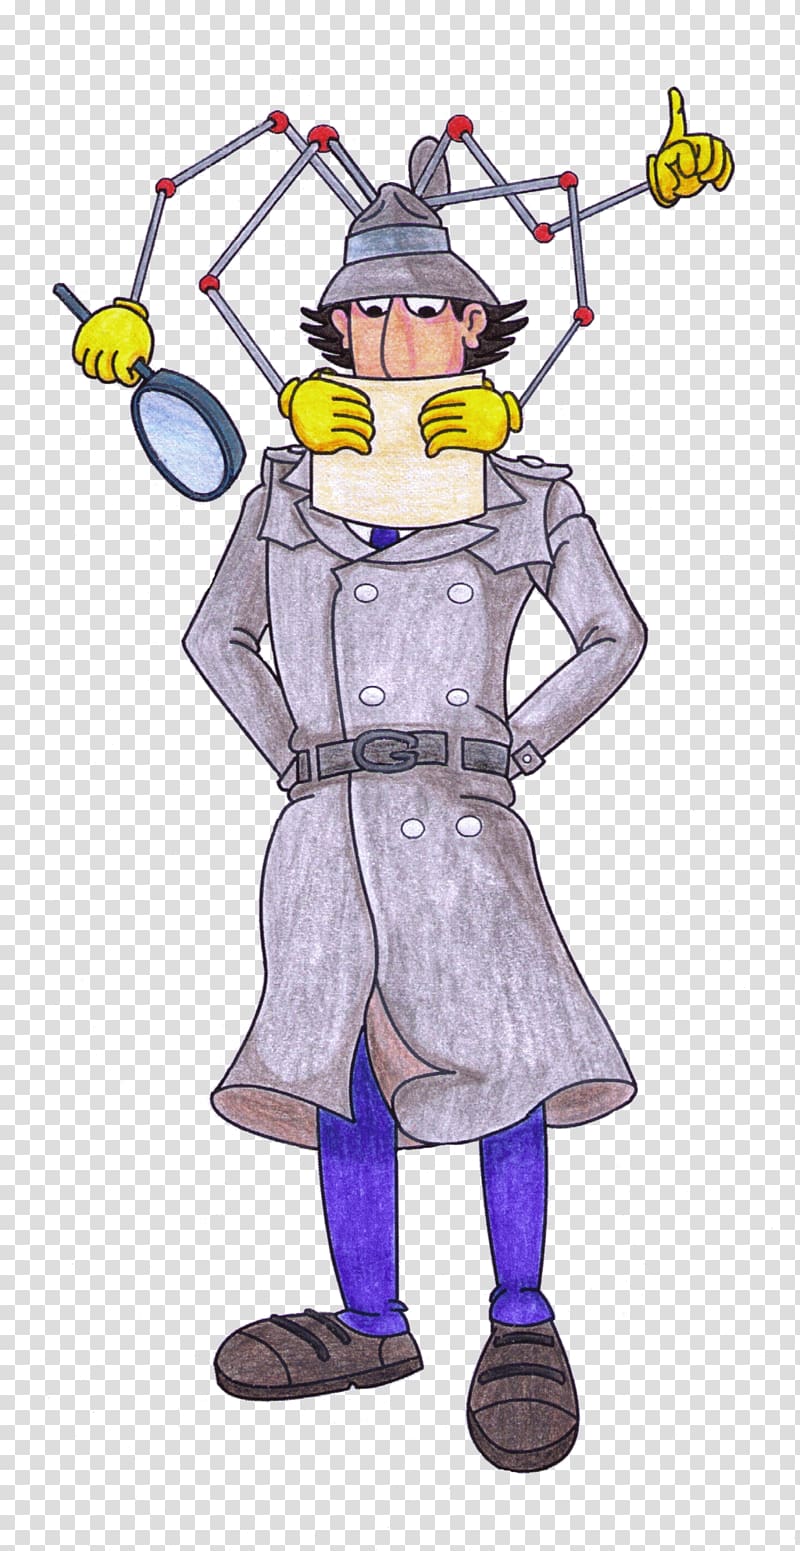 Inspector Gadget Cartoon Free Comic Book Day Animation, Animation transparent background PNG clipart